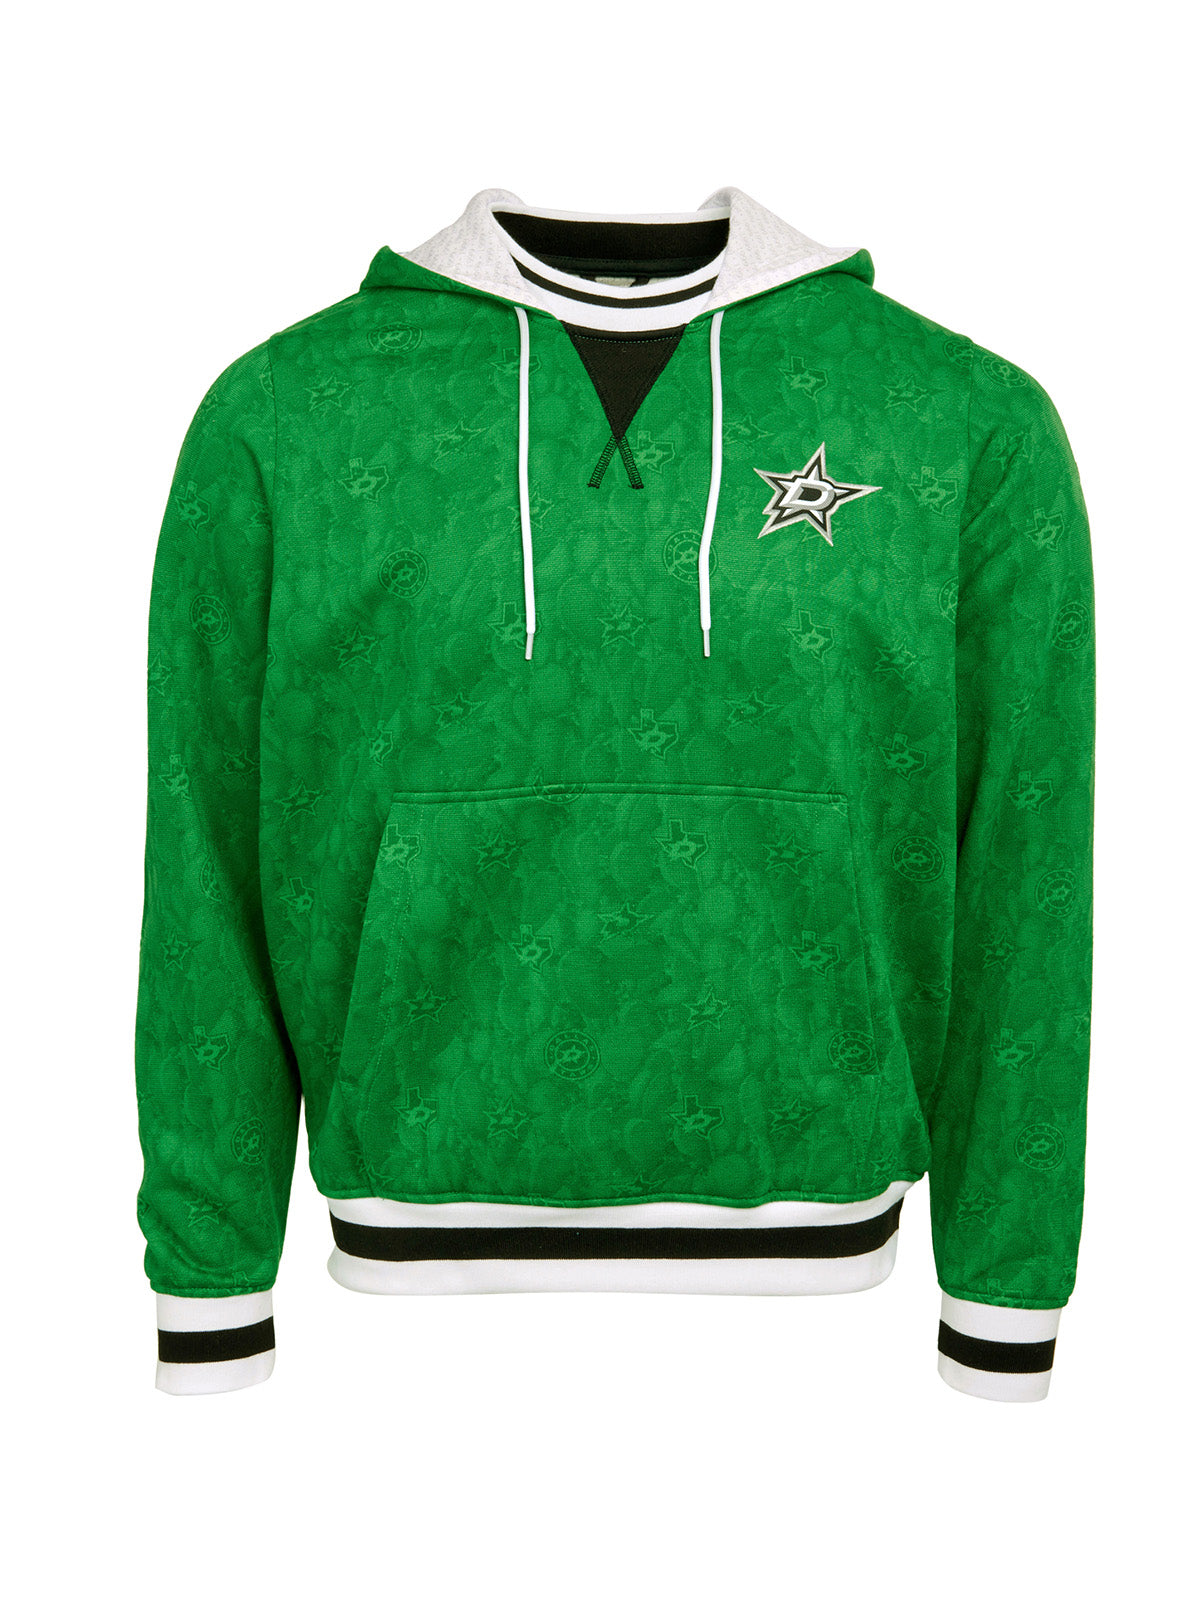 Dallas Stars Hoodie - Show your team spirit, with the iconic team logo patch on the front left chest, and proudly display your Dallas Stars support in their team colors with this NHL hockey hoodie.